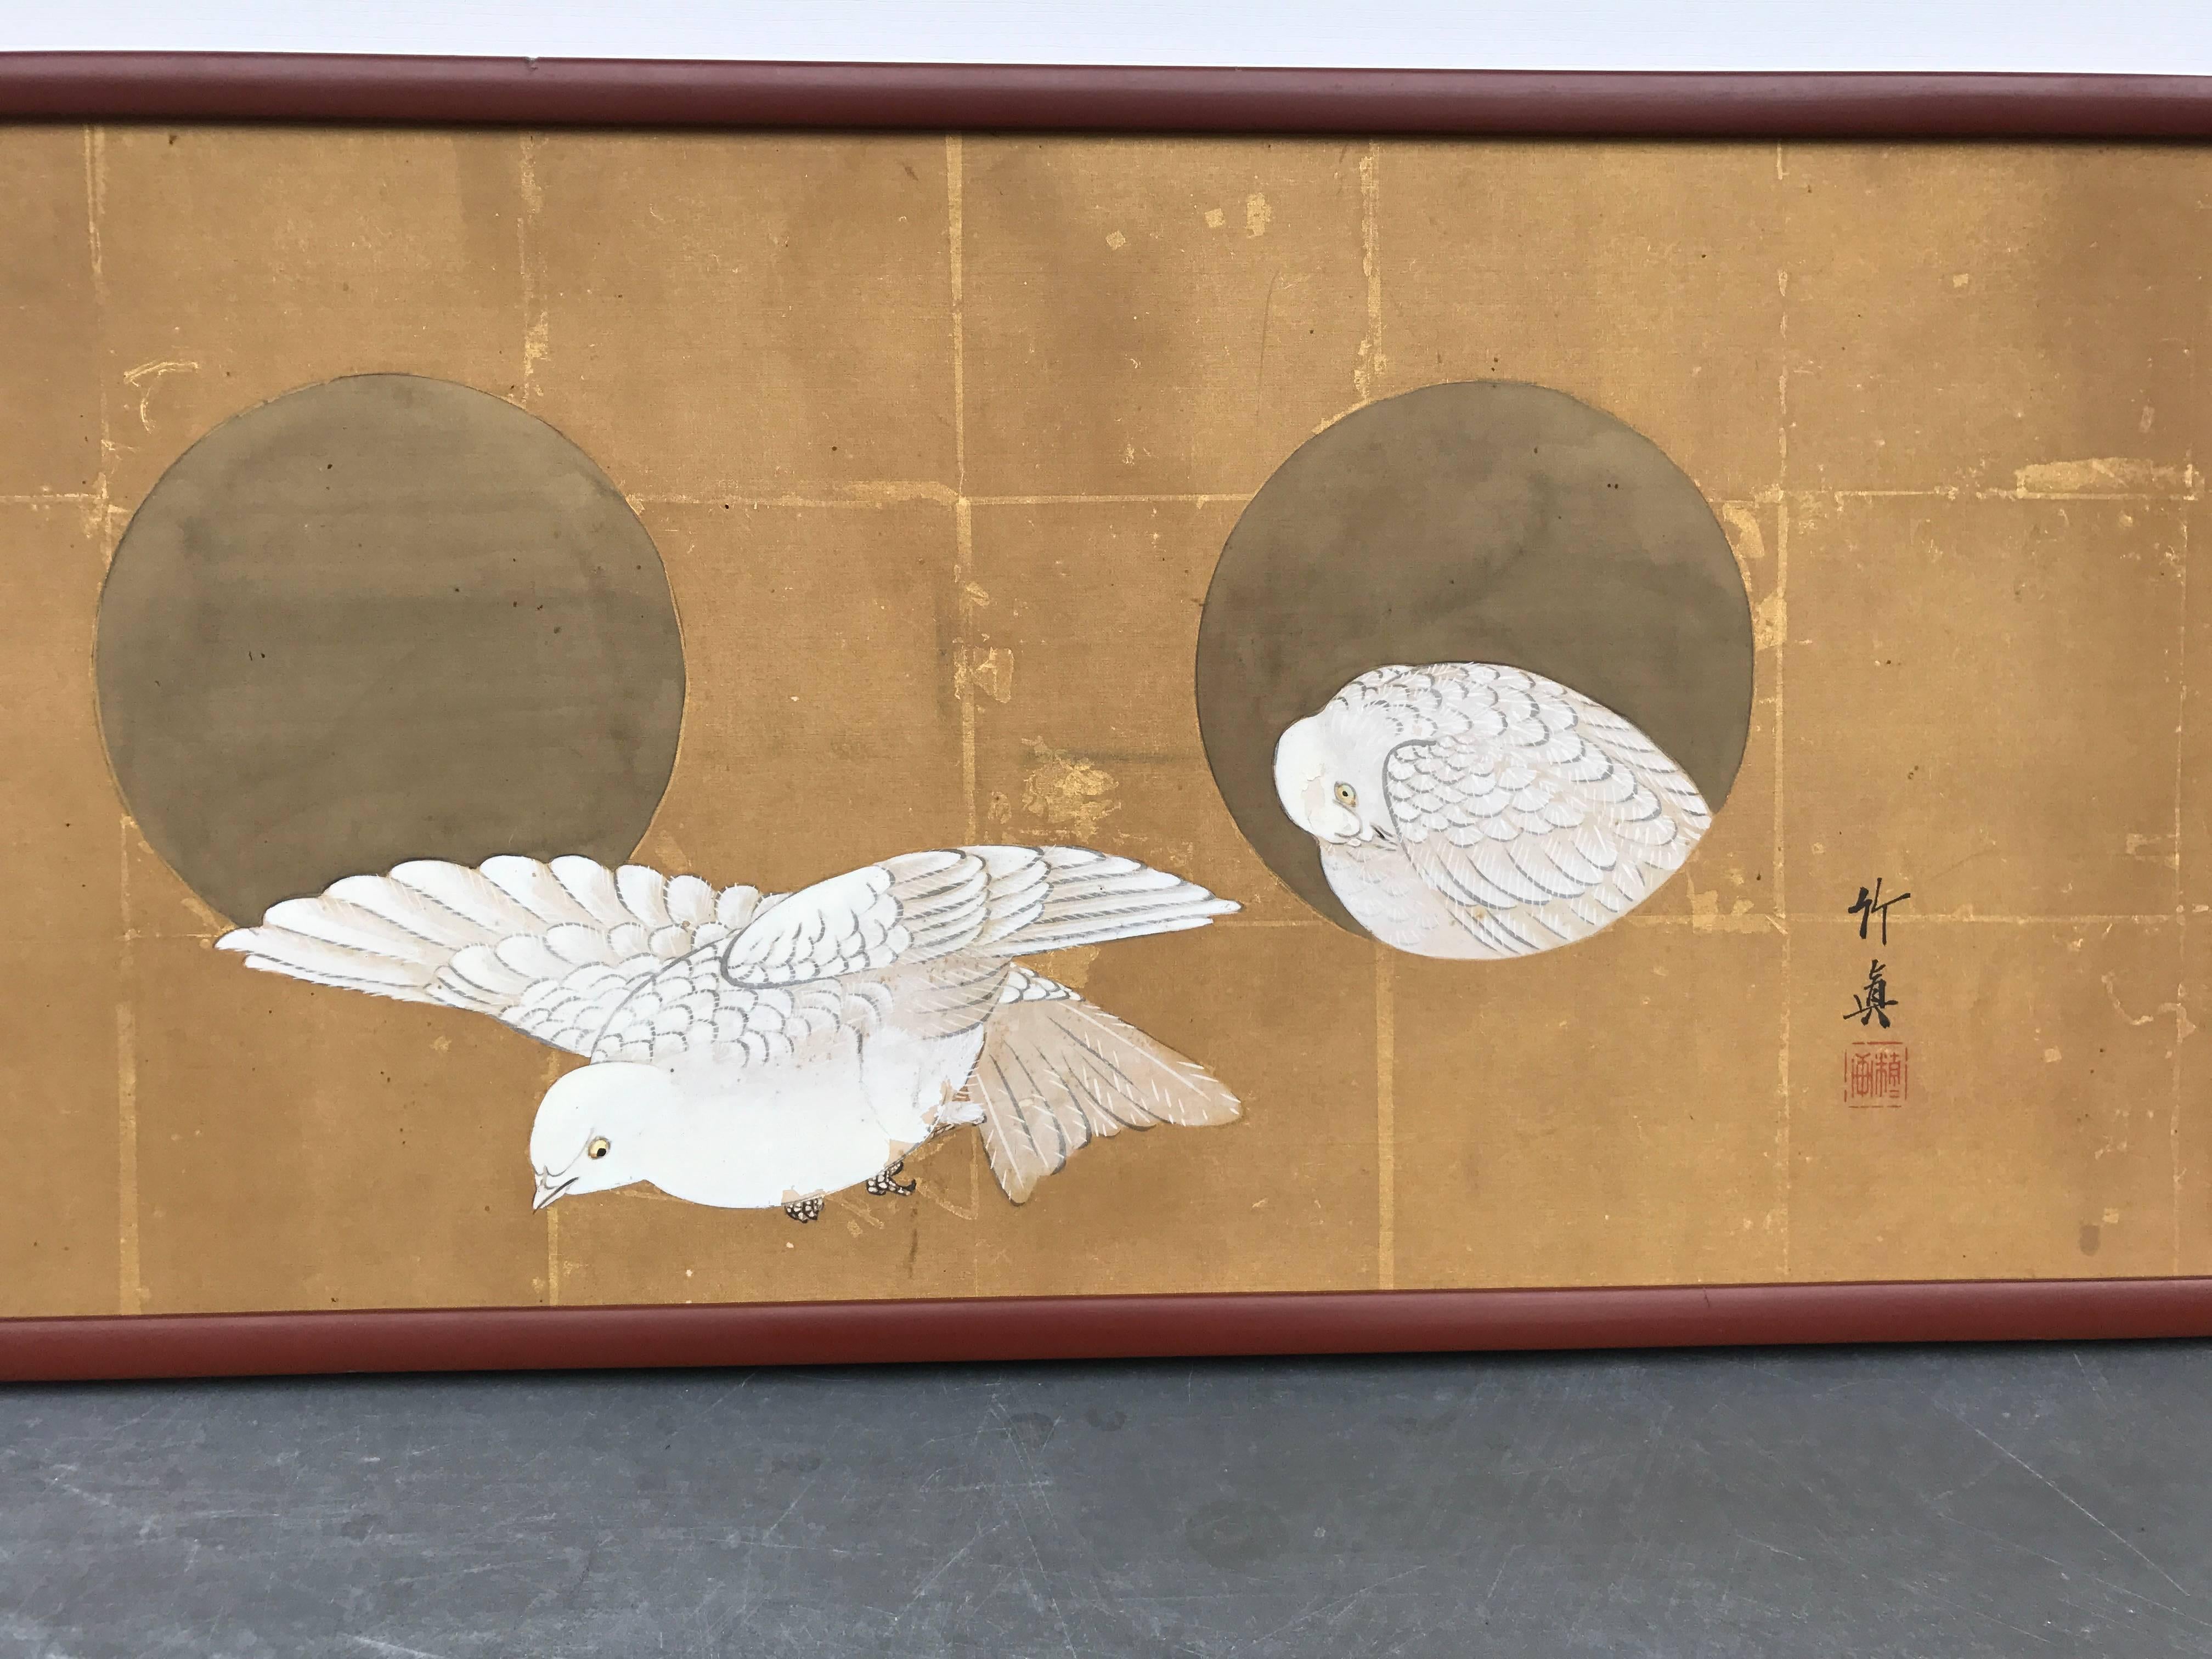 FEBRUARY SALE - NOW SAVE 25% AND MORE

Japan a simple antique Painting -Gaku-, on silk, of a pair of white peace doves rendered against multiple golden brown moon shapes, perhaps an entrance to a bird dwelling, the peaceful work finished with a red